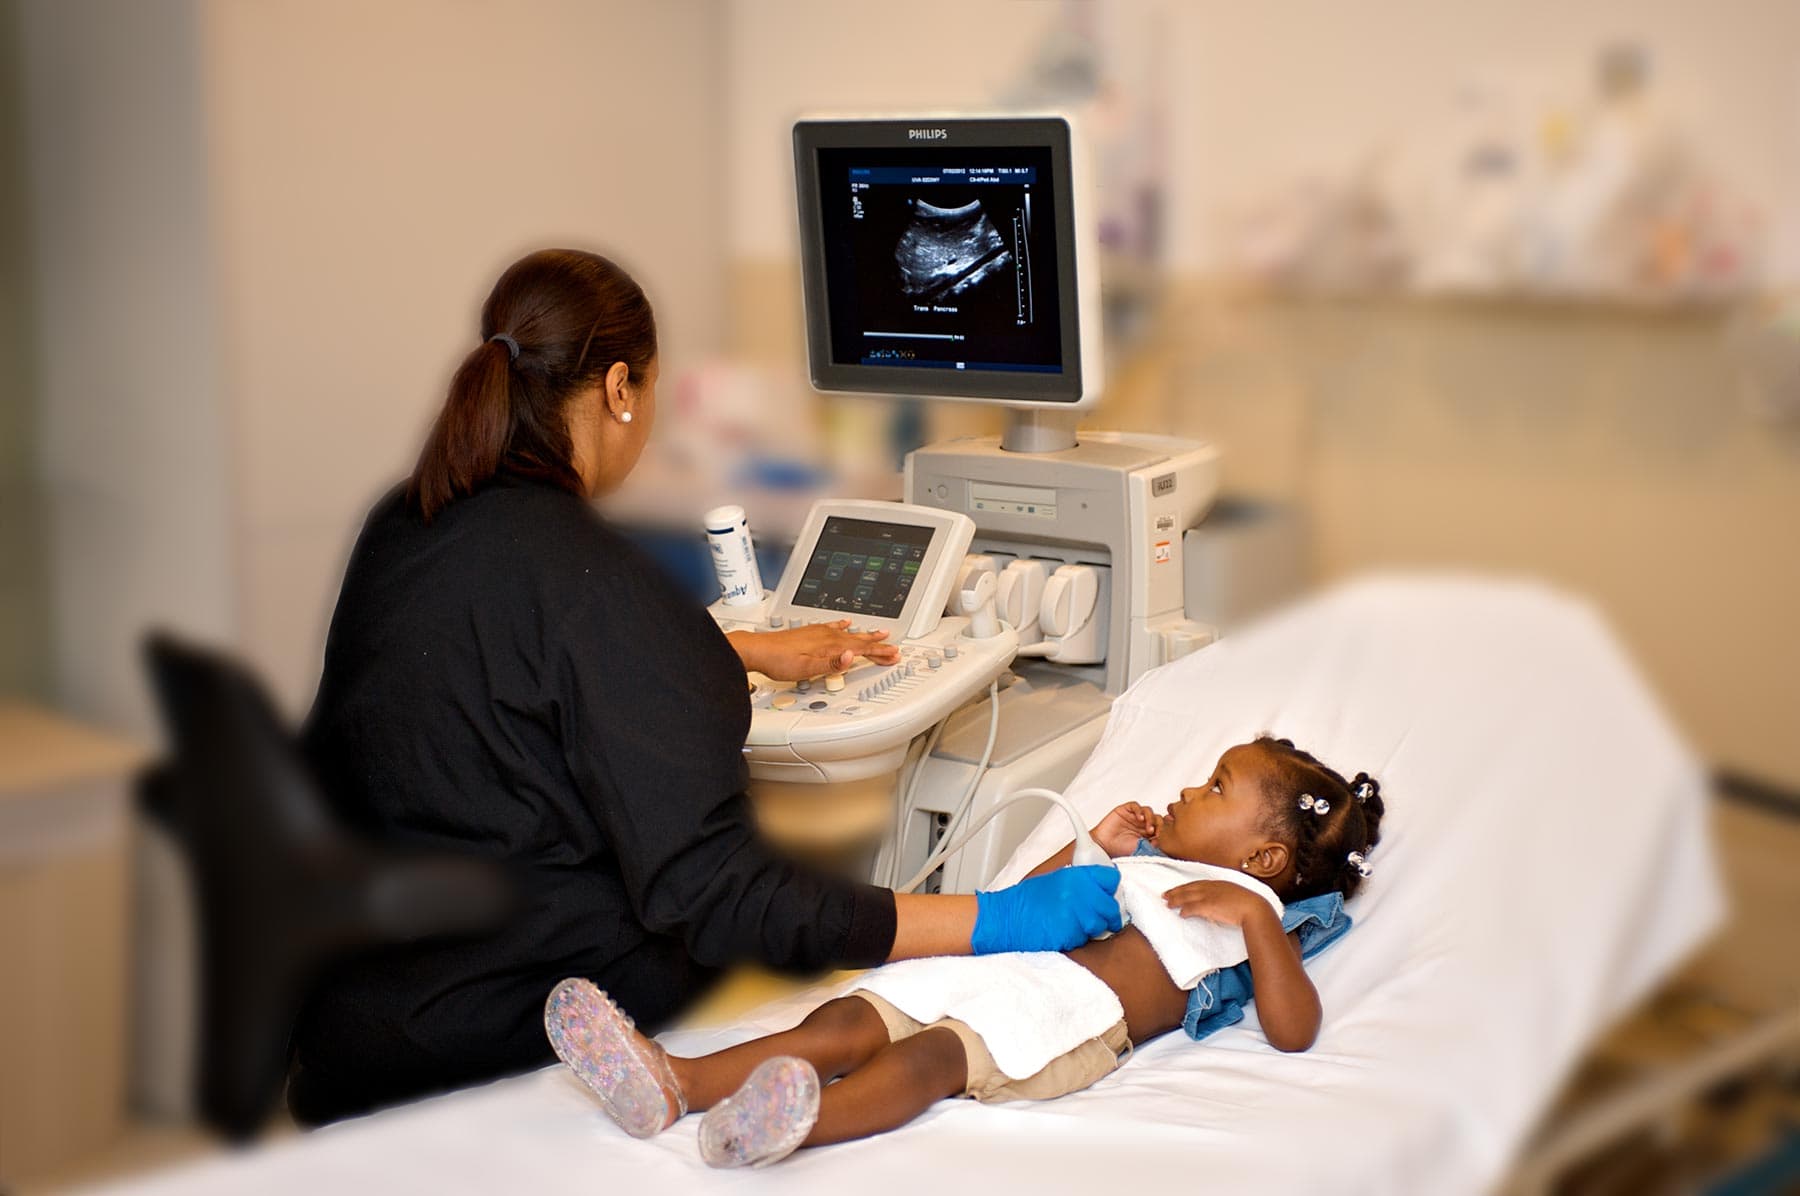 A radiologist gives a young girl an ultrasound as the girl looks at the monitor